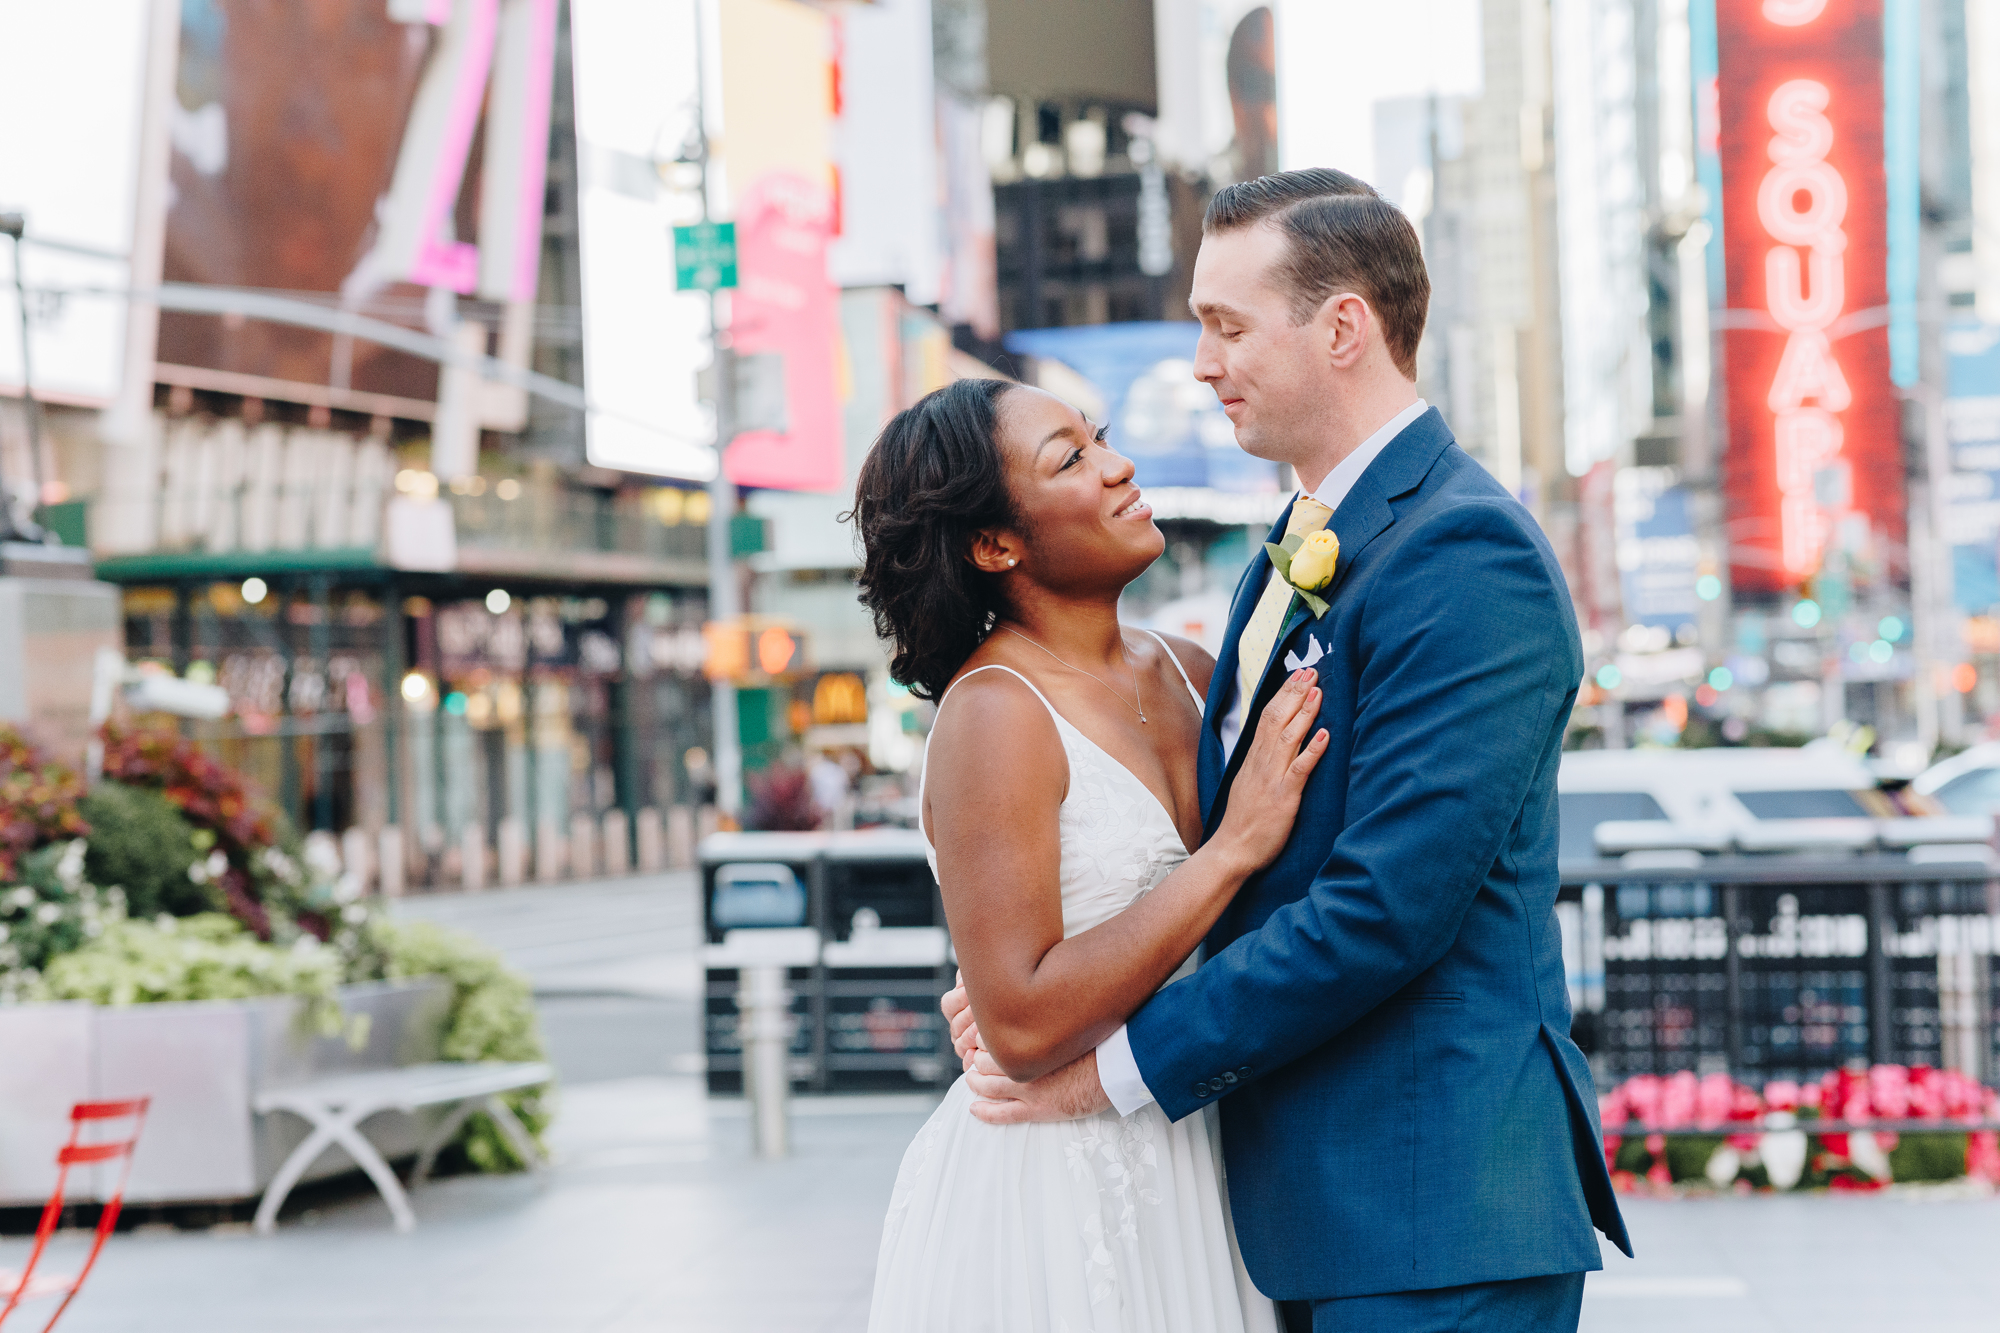 Jaw-Dropping Times Square Wedding Photos in New York